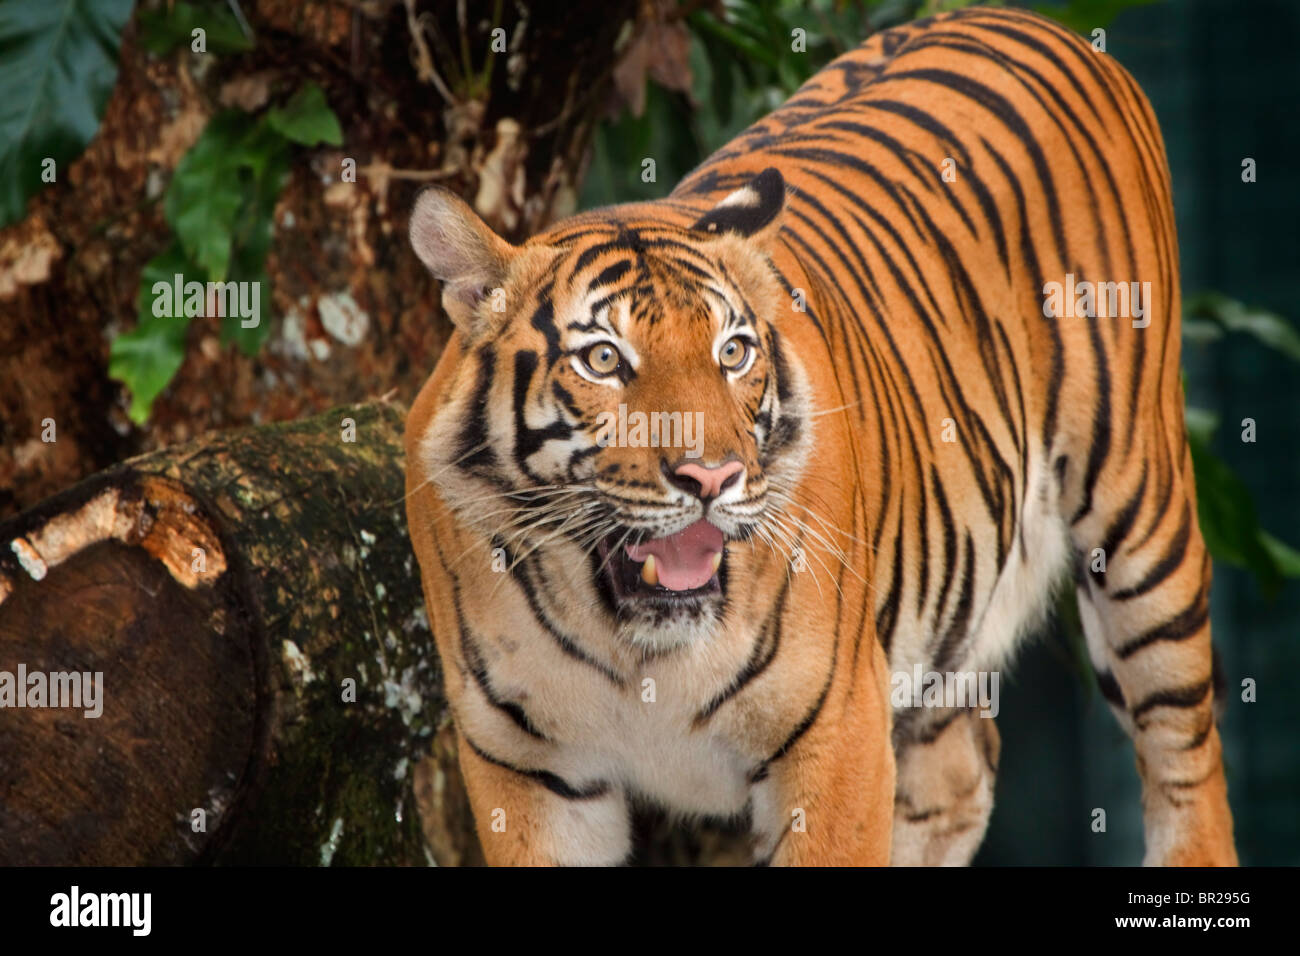 Malayan Tiger, a recently identified subspecies of tiger, found only in Thailand and peninsular Malaysia. Stock Photo